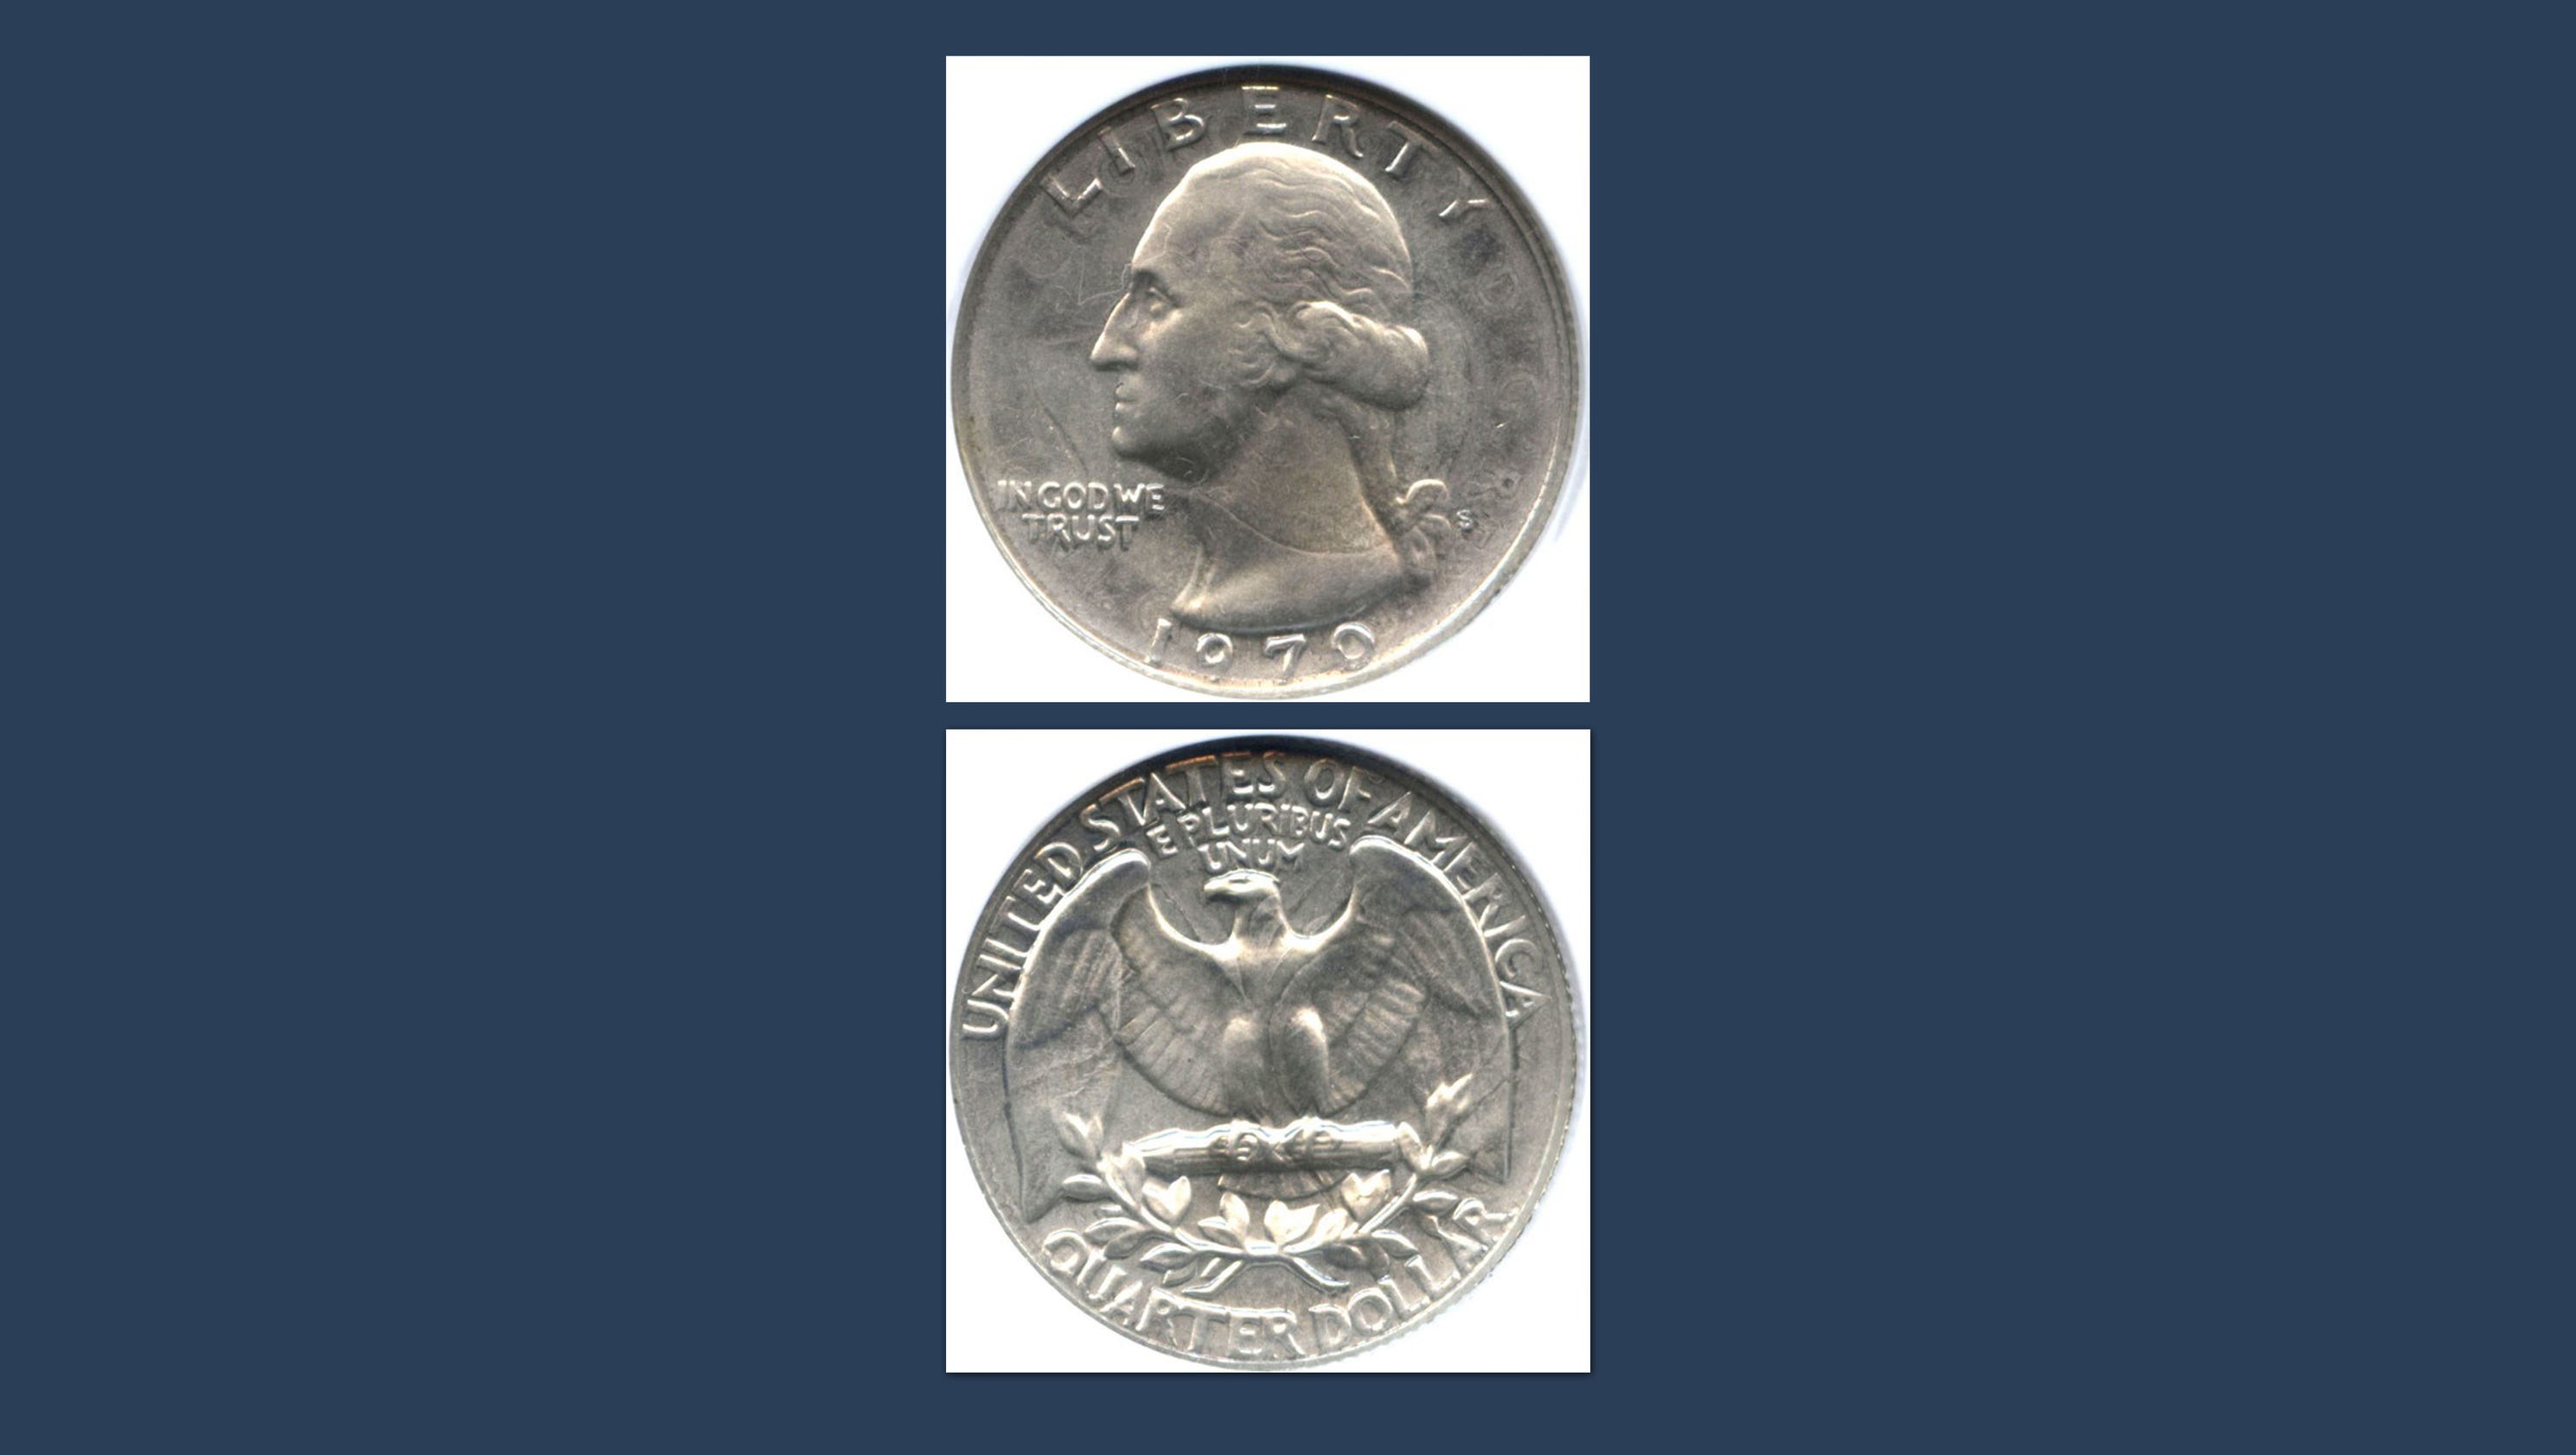 Rare 1970 quarter could be worth thousands